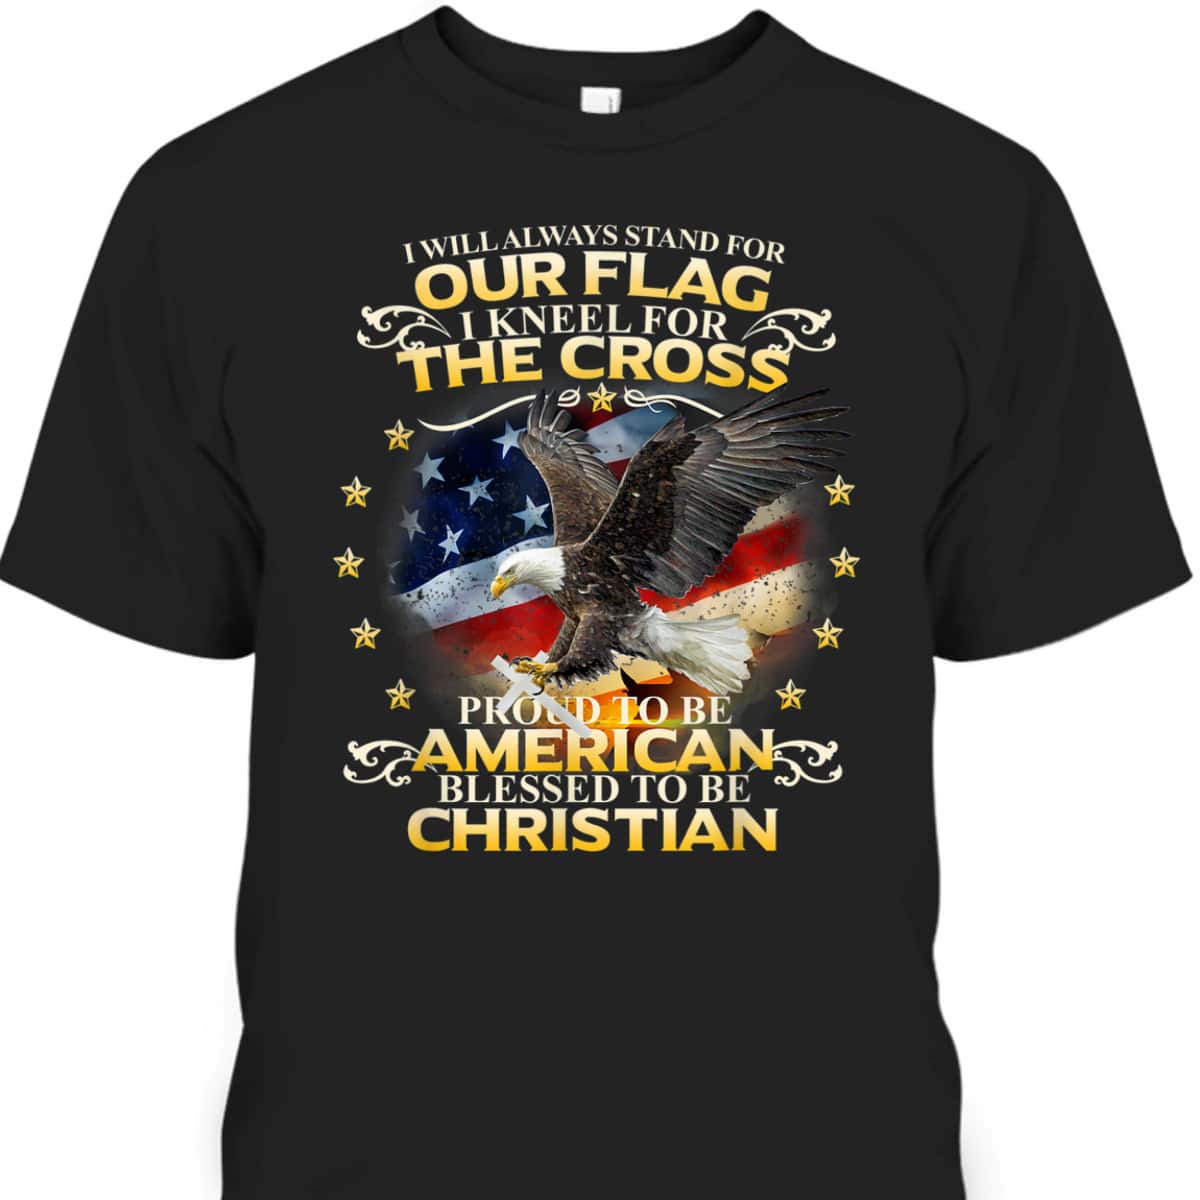 Christian Patriotic T-Shirt Stand For Our Flag Kneel For The Cross Eagle American US Flag